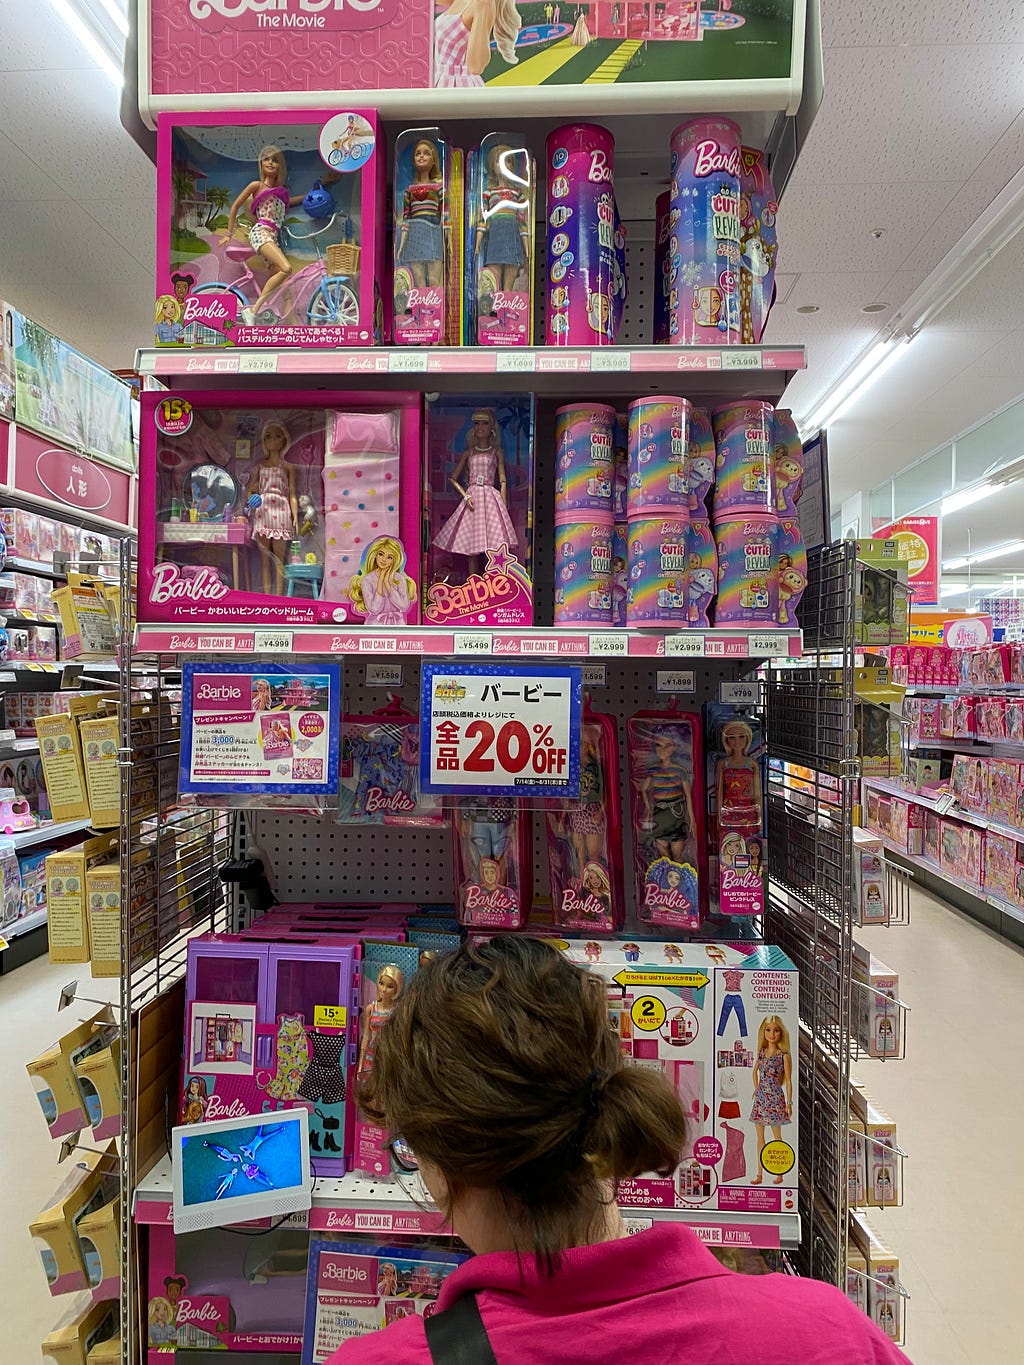 A display of conventional blonde Barbie dolls at Toys ‘R Us in Japan.